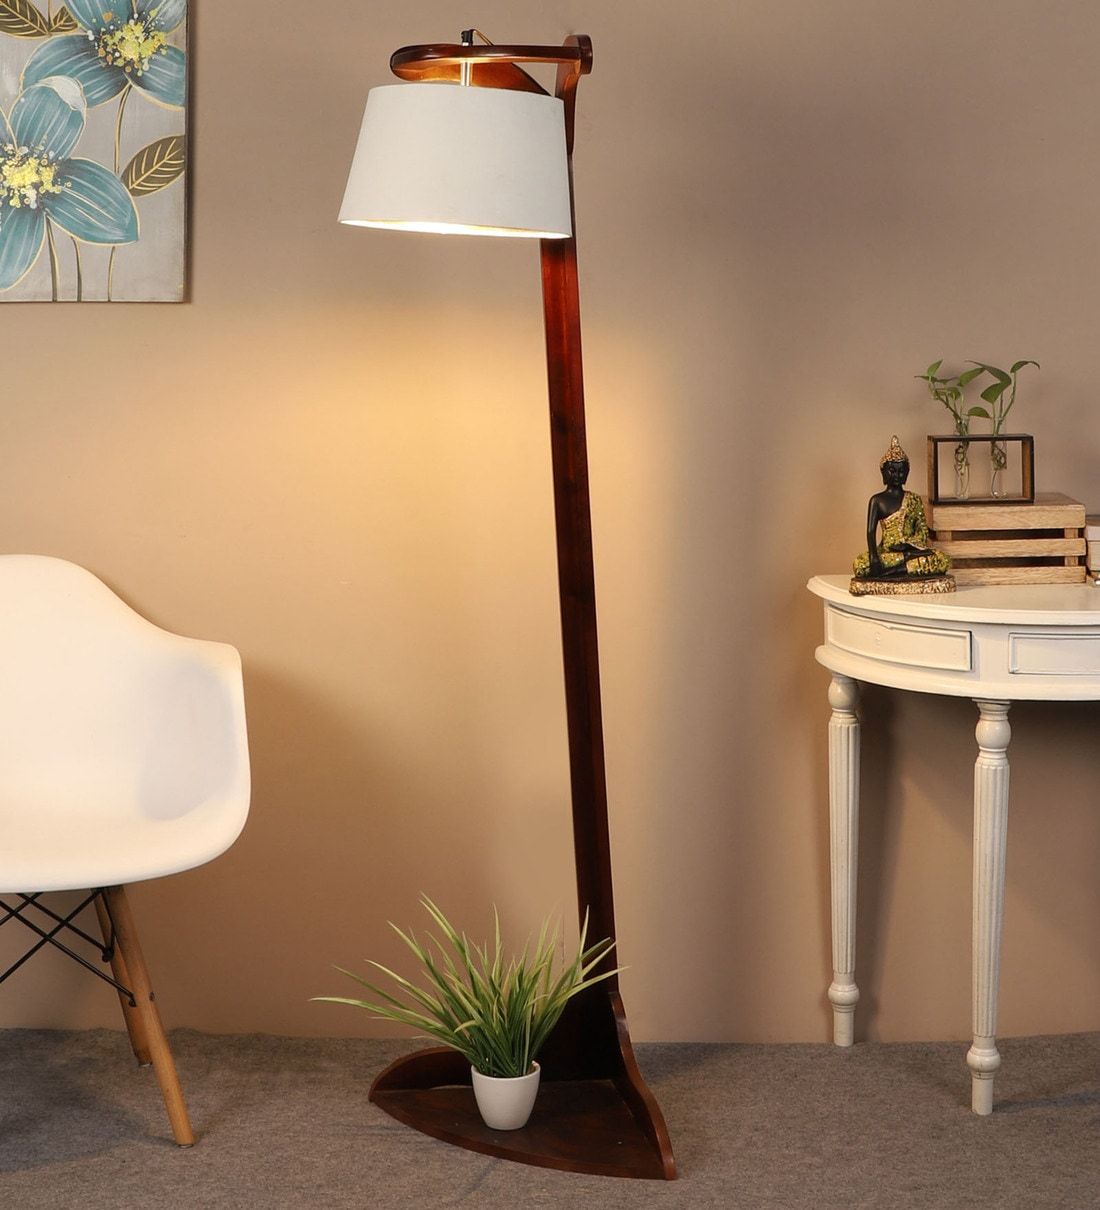 Buy White Shade Floor Lamp With Mango Wood Basethe Lighting Hub Online  – Club Floor Lamps – Floor Lamps – Lamps And Lighting – Pepperfry Product Intended For Mango Wood Floor Lamps (View 11 of 15)